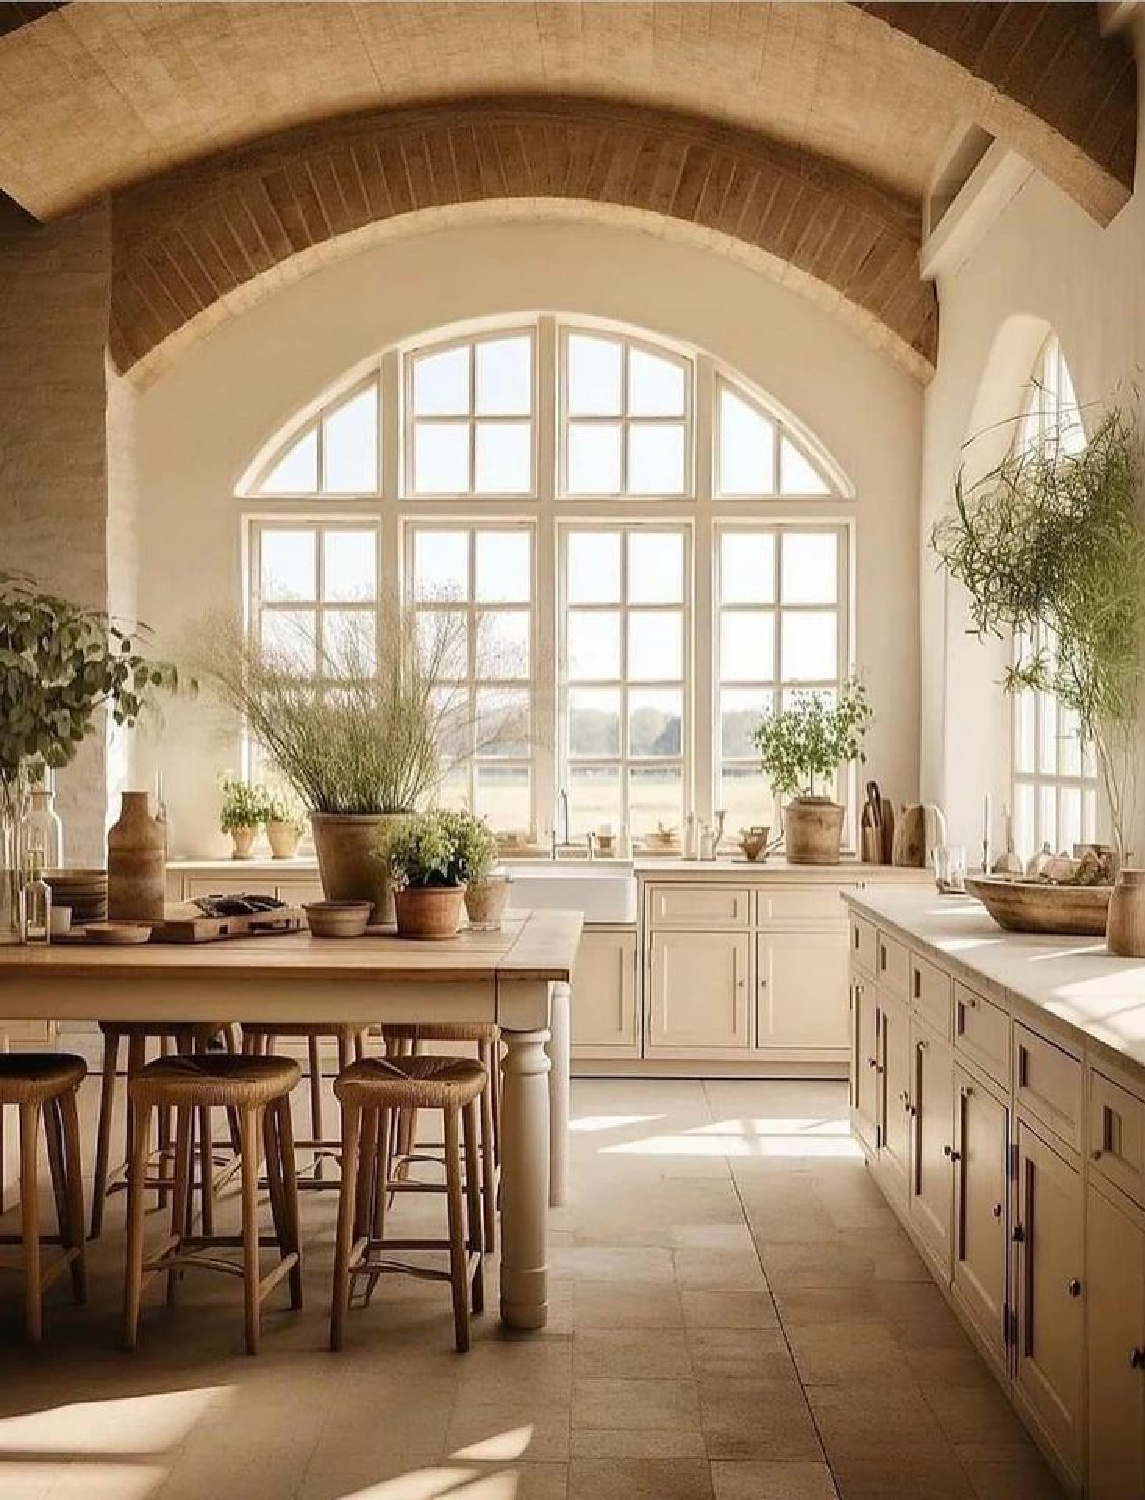 Magical English country kitchen with arches and Shaker cabinetry. AI Design via Whitney Hess (Just Decorate!). #aidesign #aiinteriordesign #aiarchitecture #aikitchen